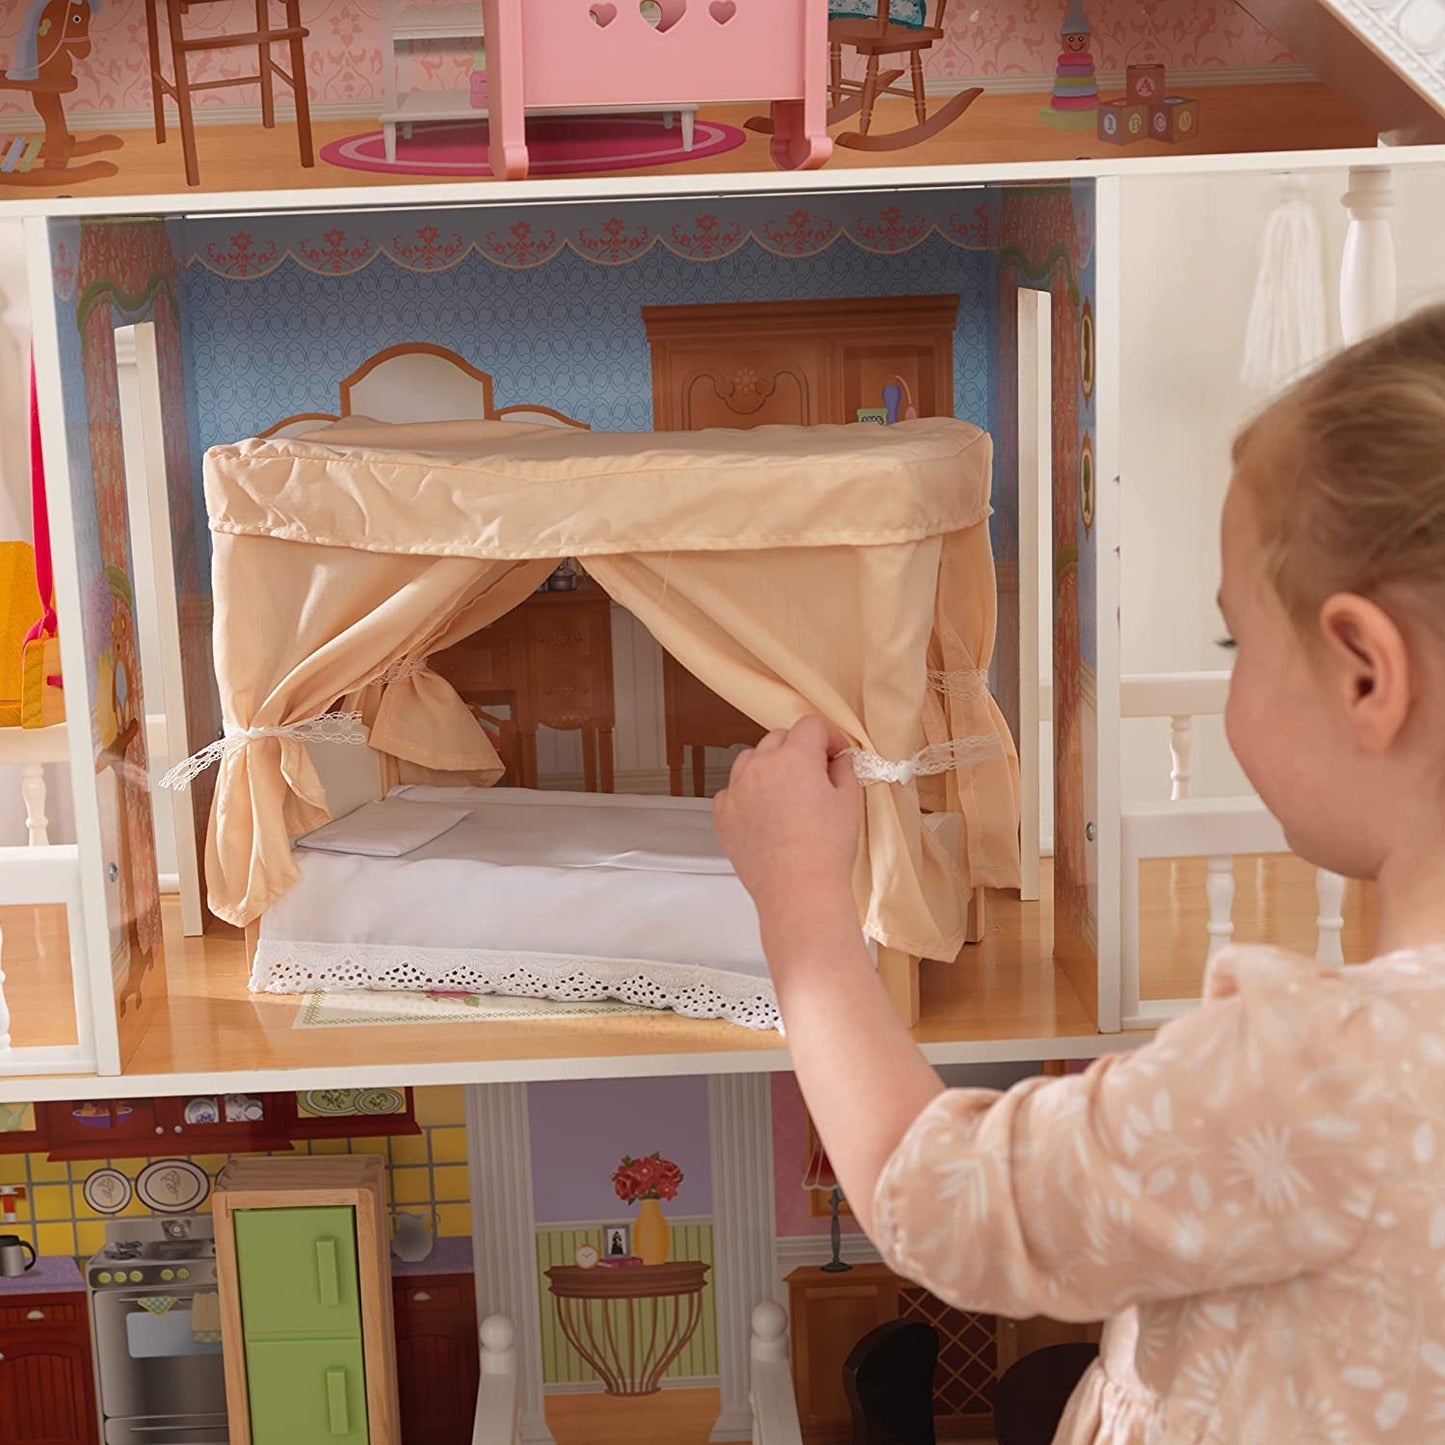 Dollhouse with Furniture for kids - Little Kids Business